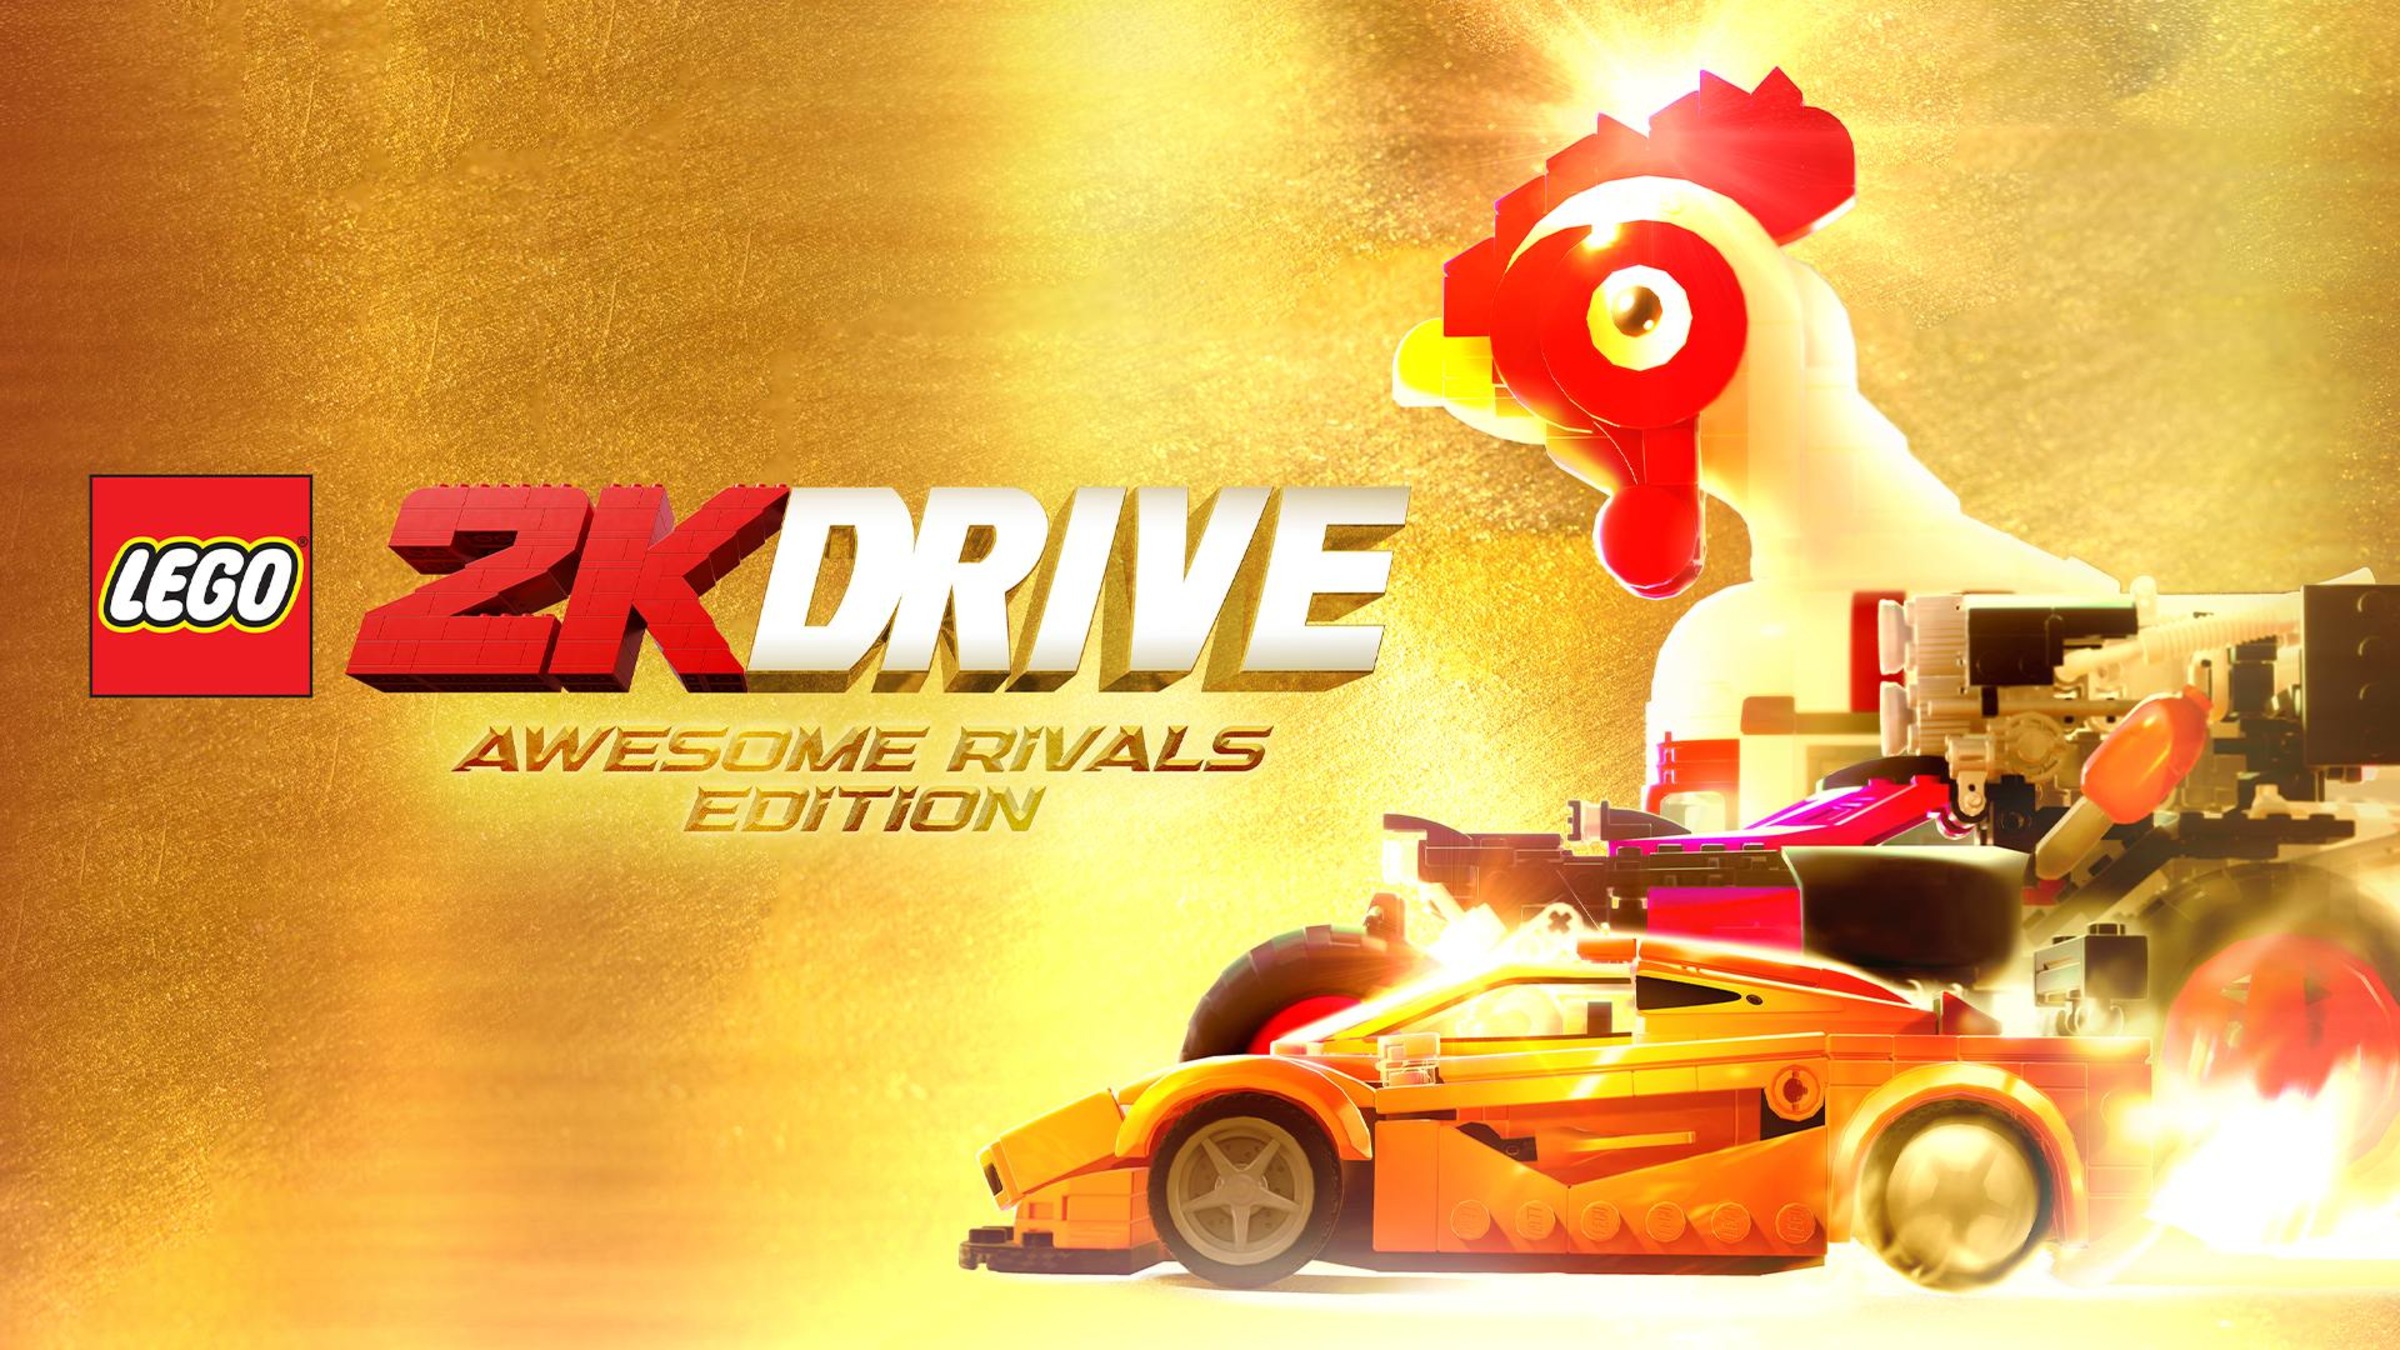 lego-2k-drive-awesome-rivals-edition-for-nintendo-switch-nintendo